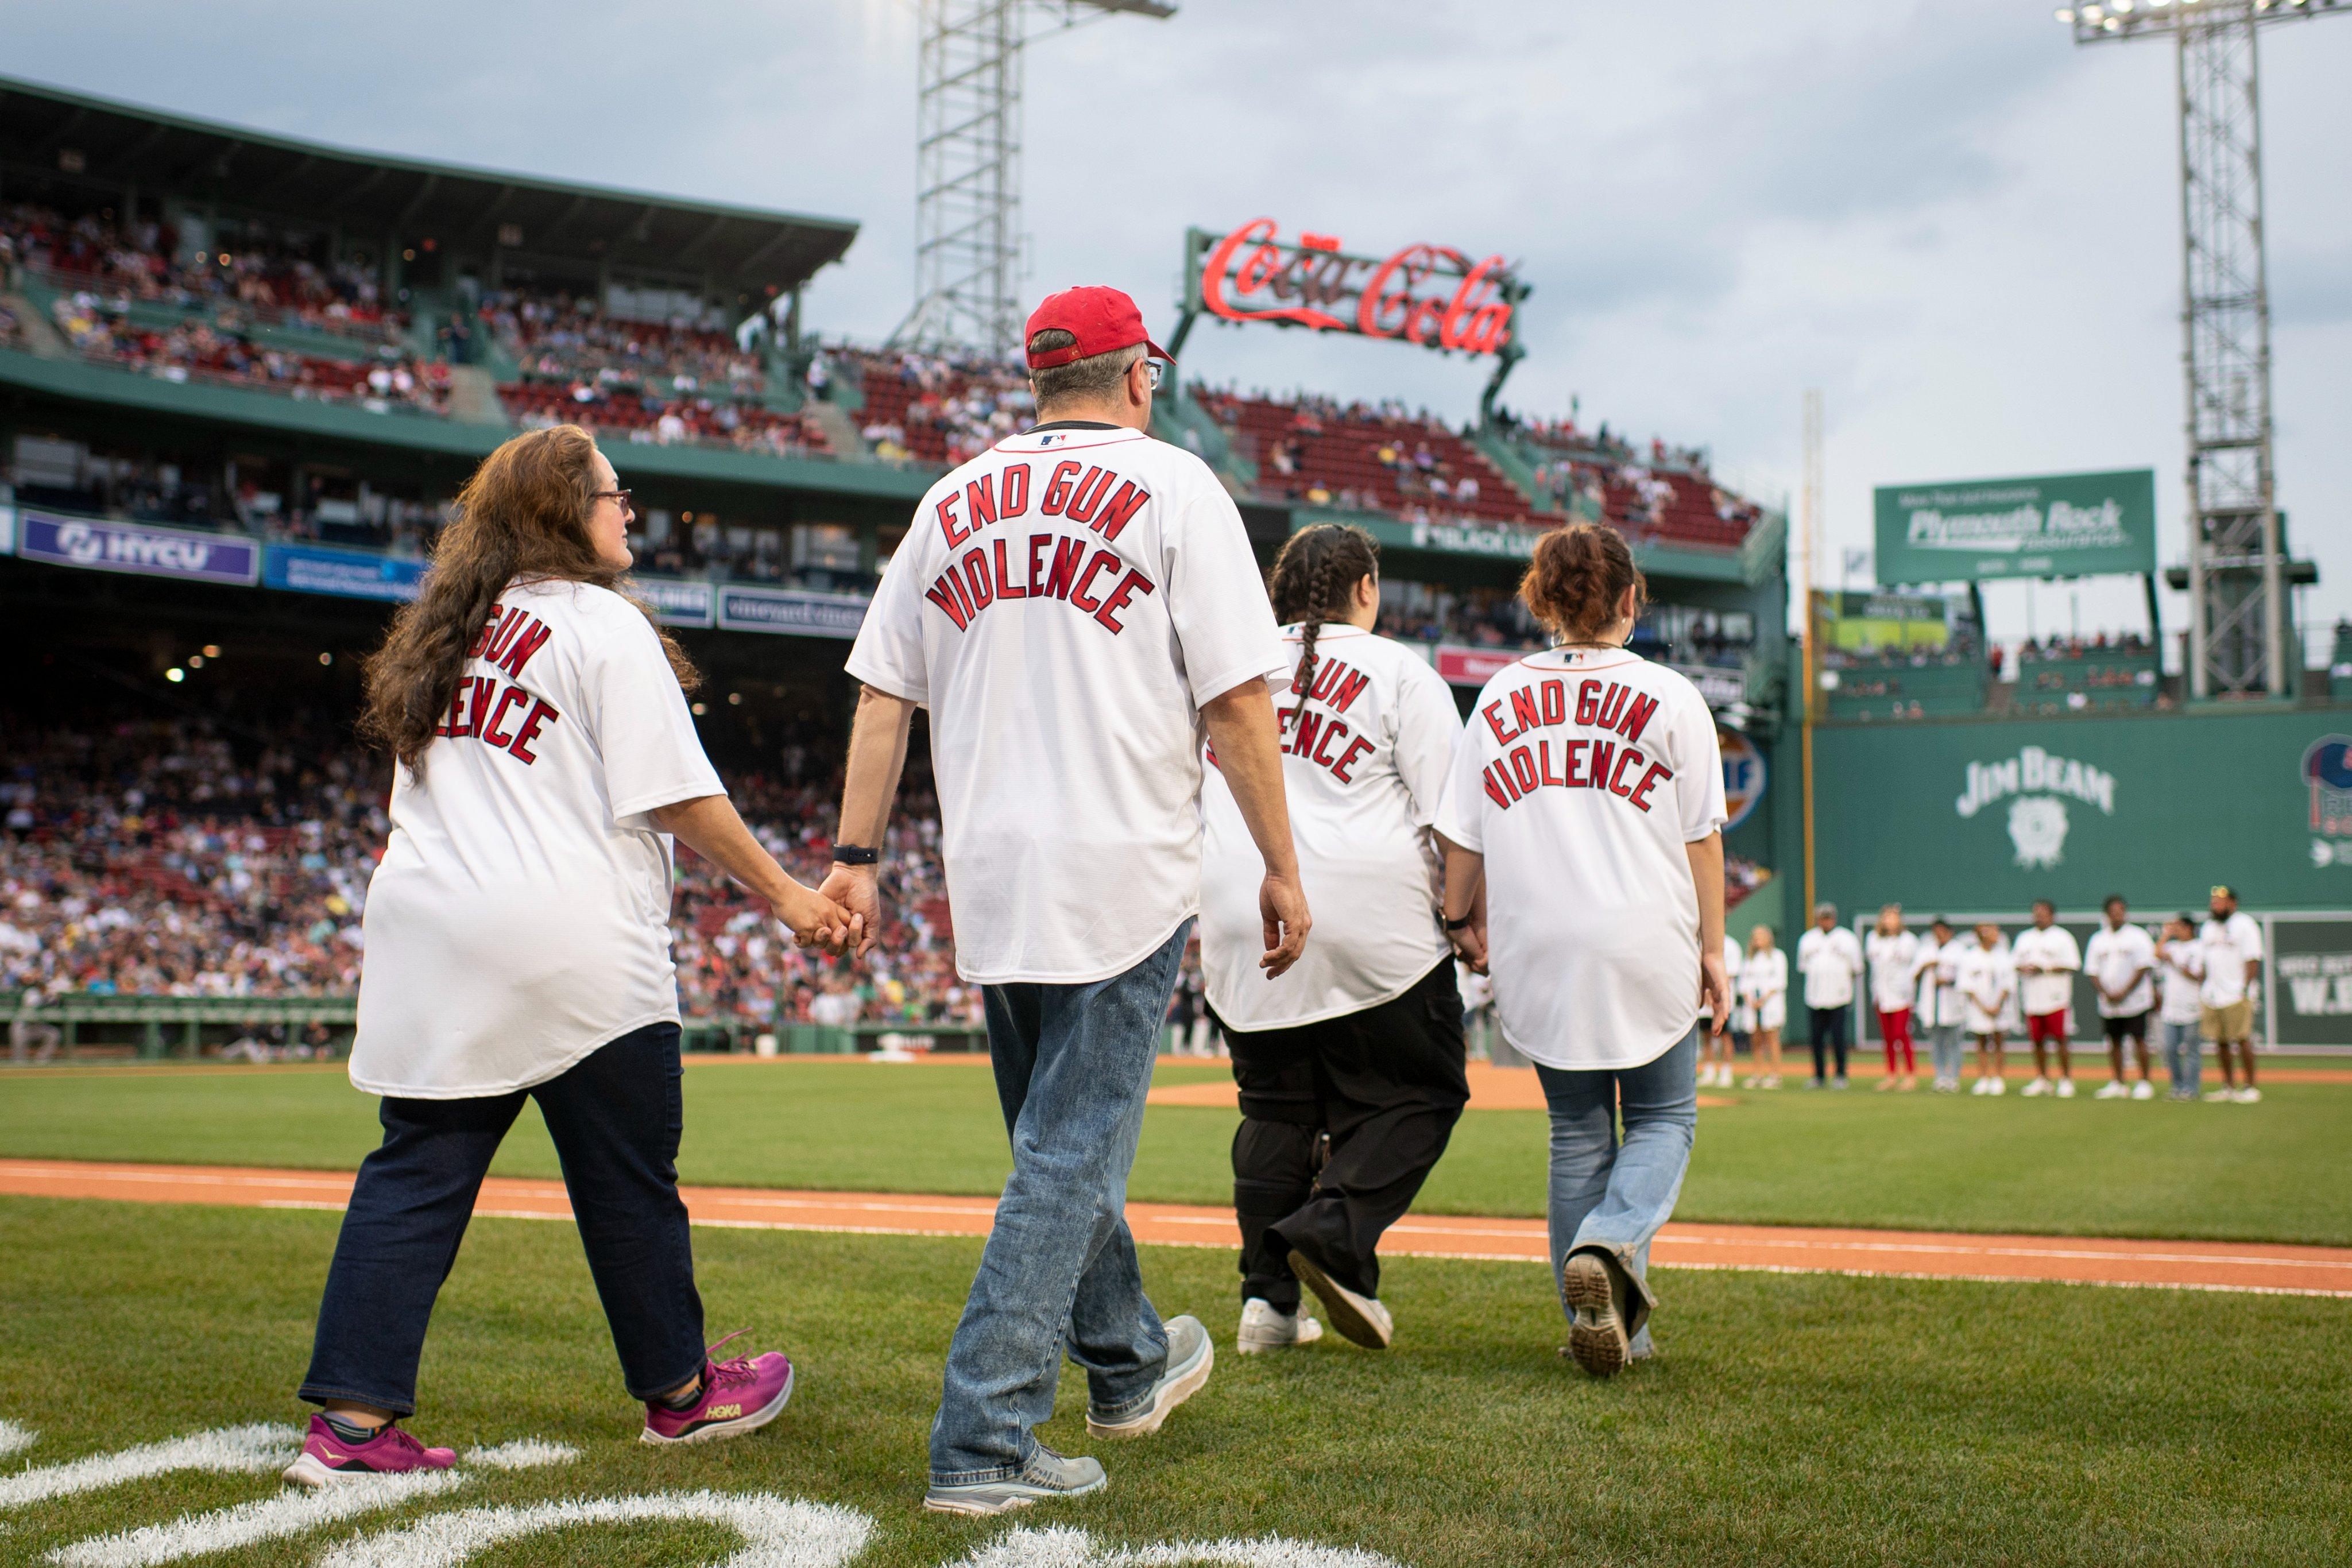 Red Sox on X: Tonight we welcomed a group of inspiring individuals who are  committed to ending gun violence in America. Their strength, effort, &  resolve calls us all to listen to